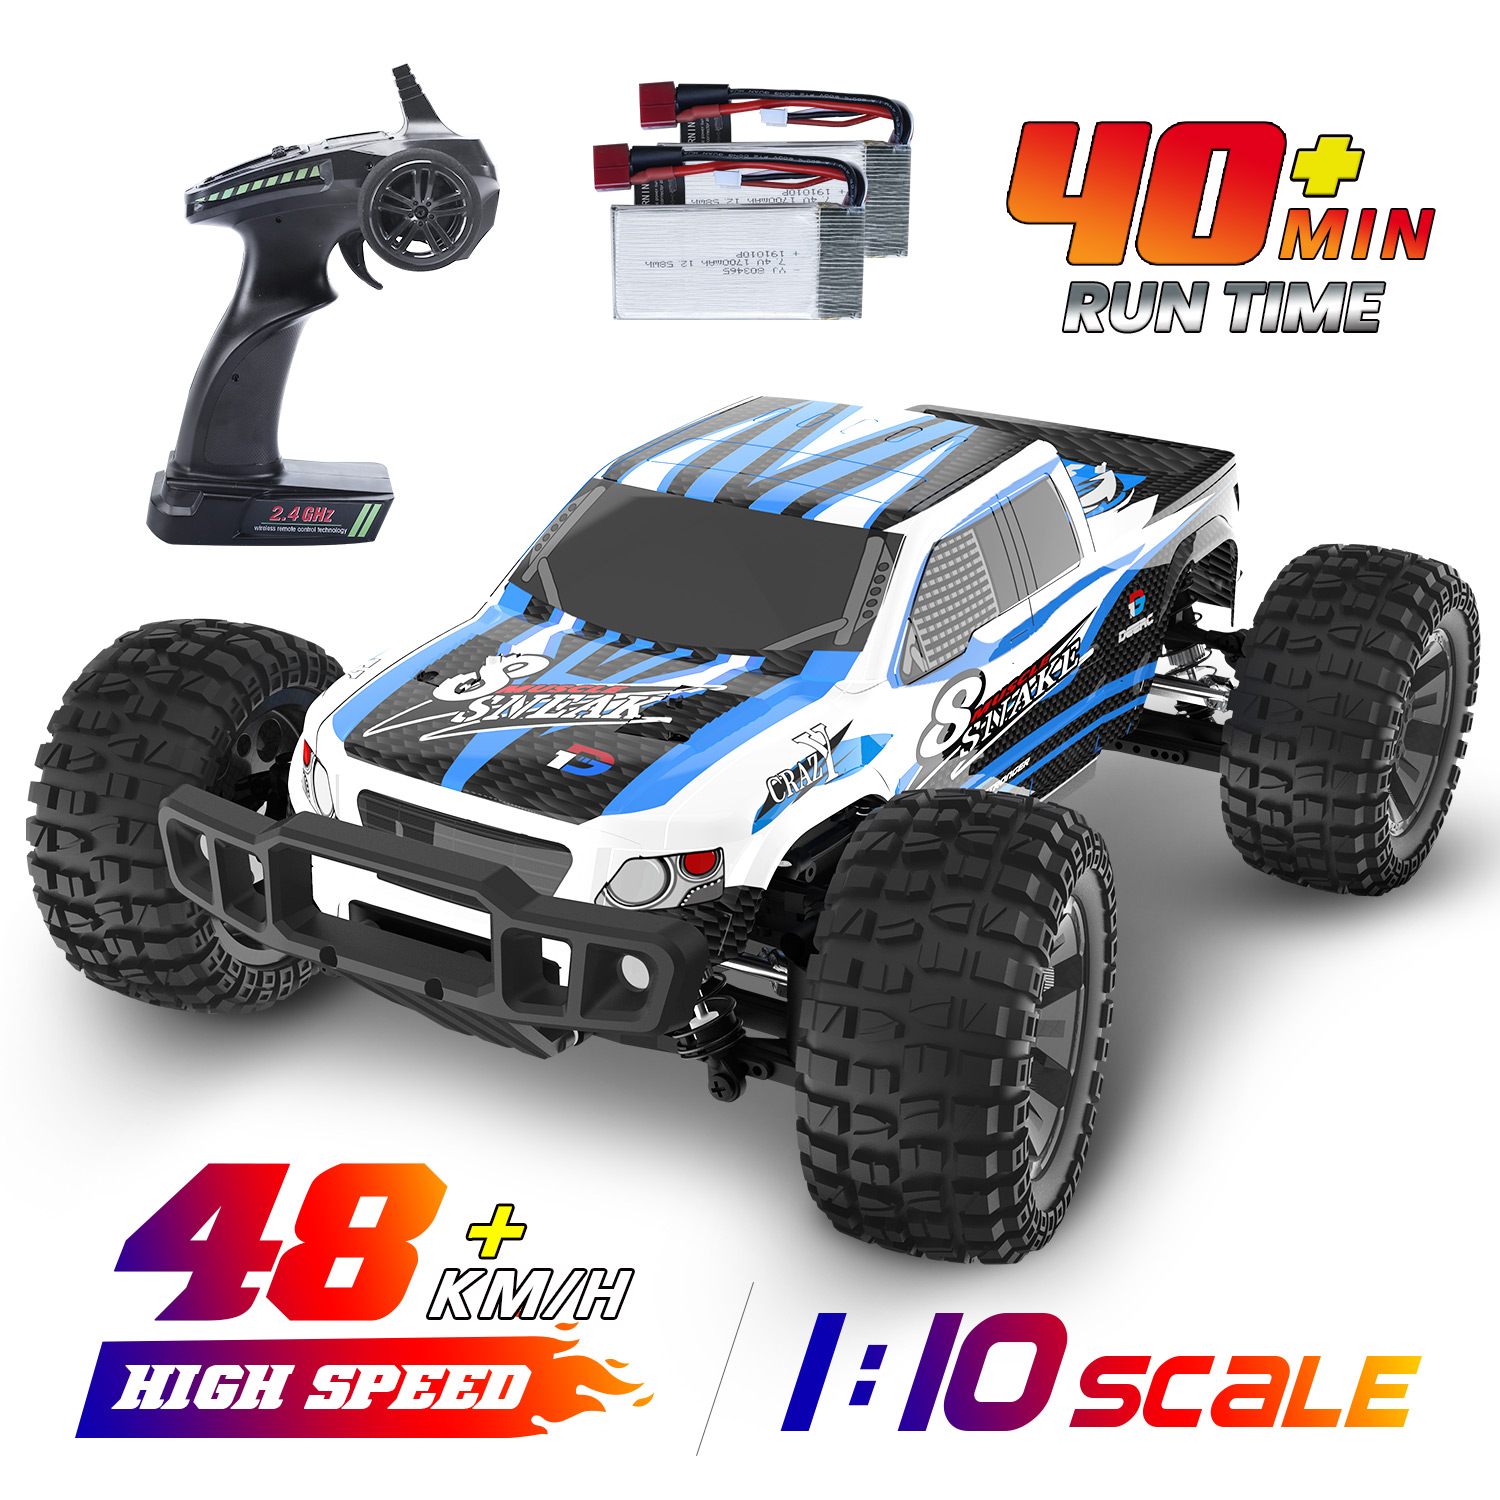 RC PRO Truggy Buggy 2.4Ghz 1:18 Ferngesteuertes Elektro Auto Offroad 70km/h RTR